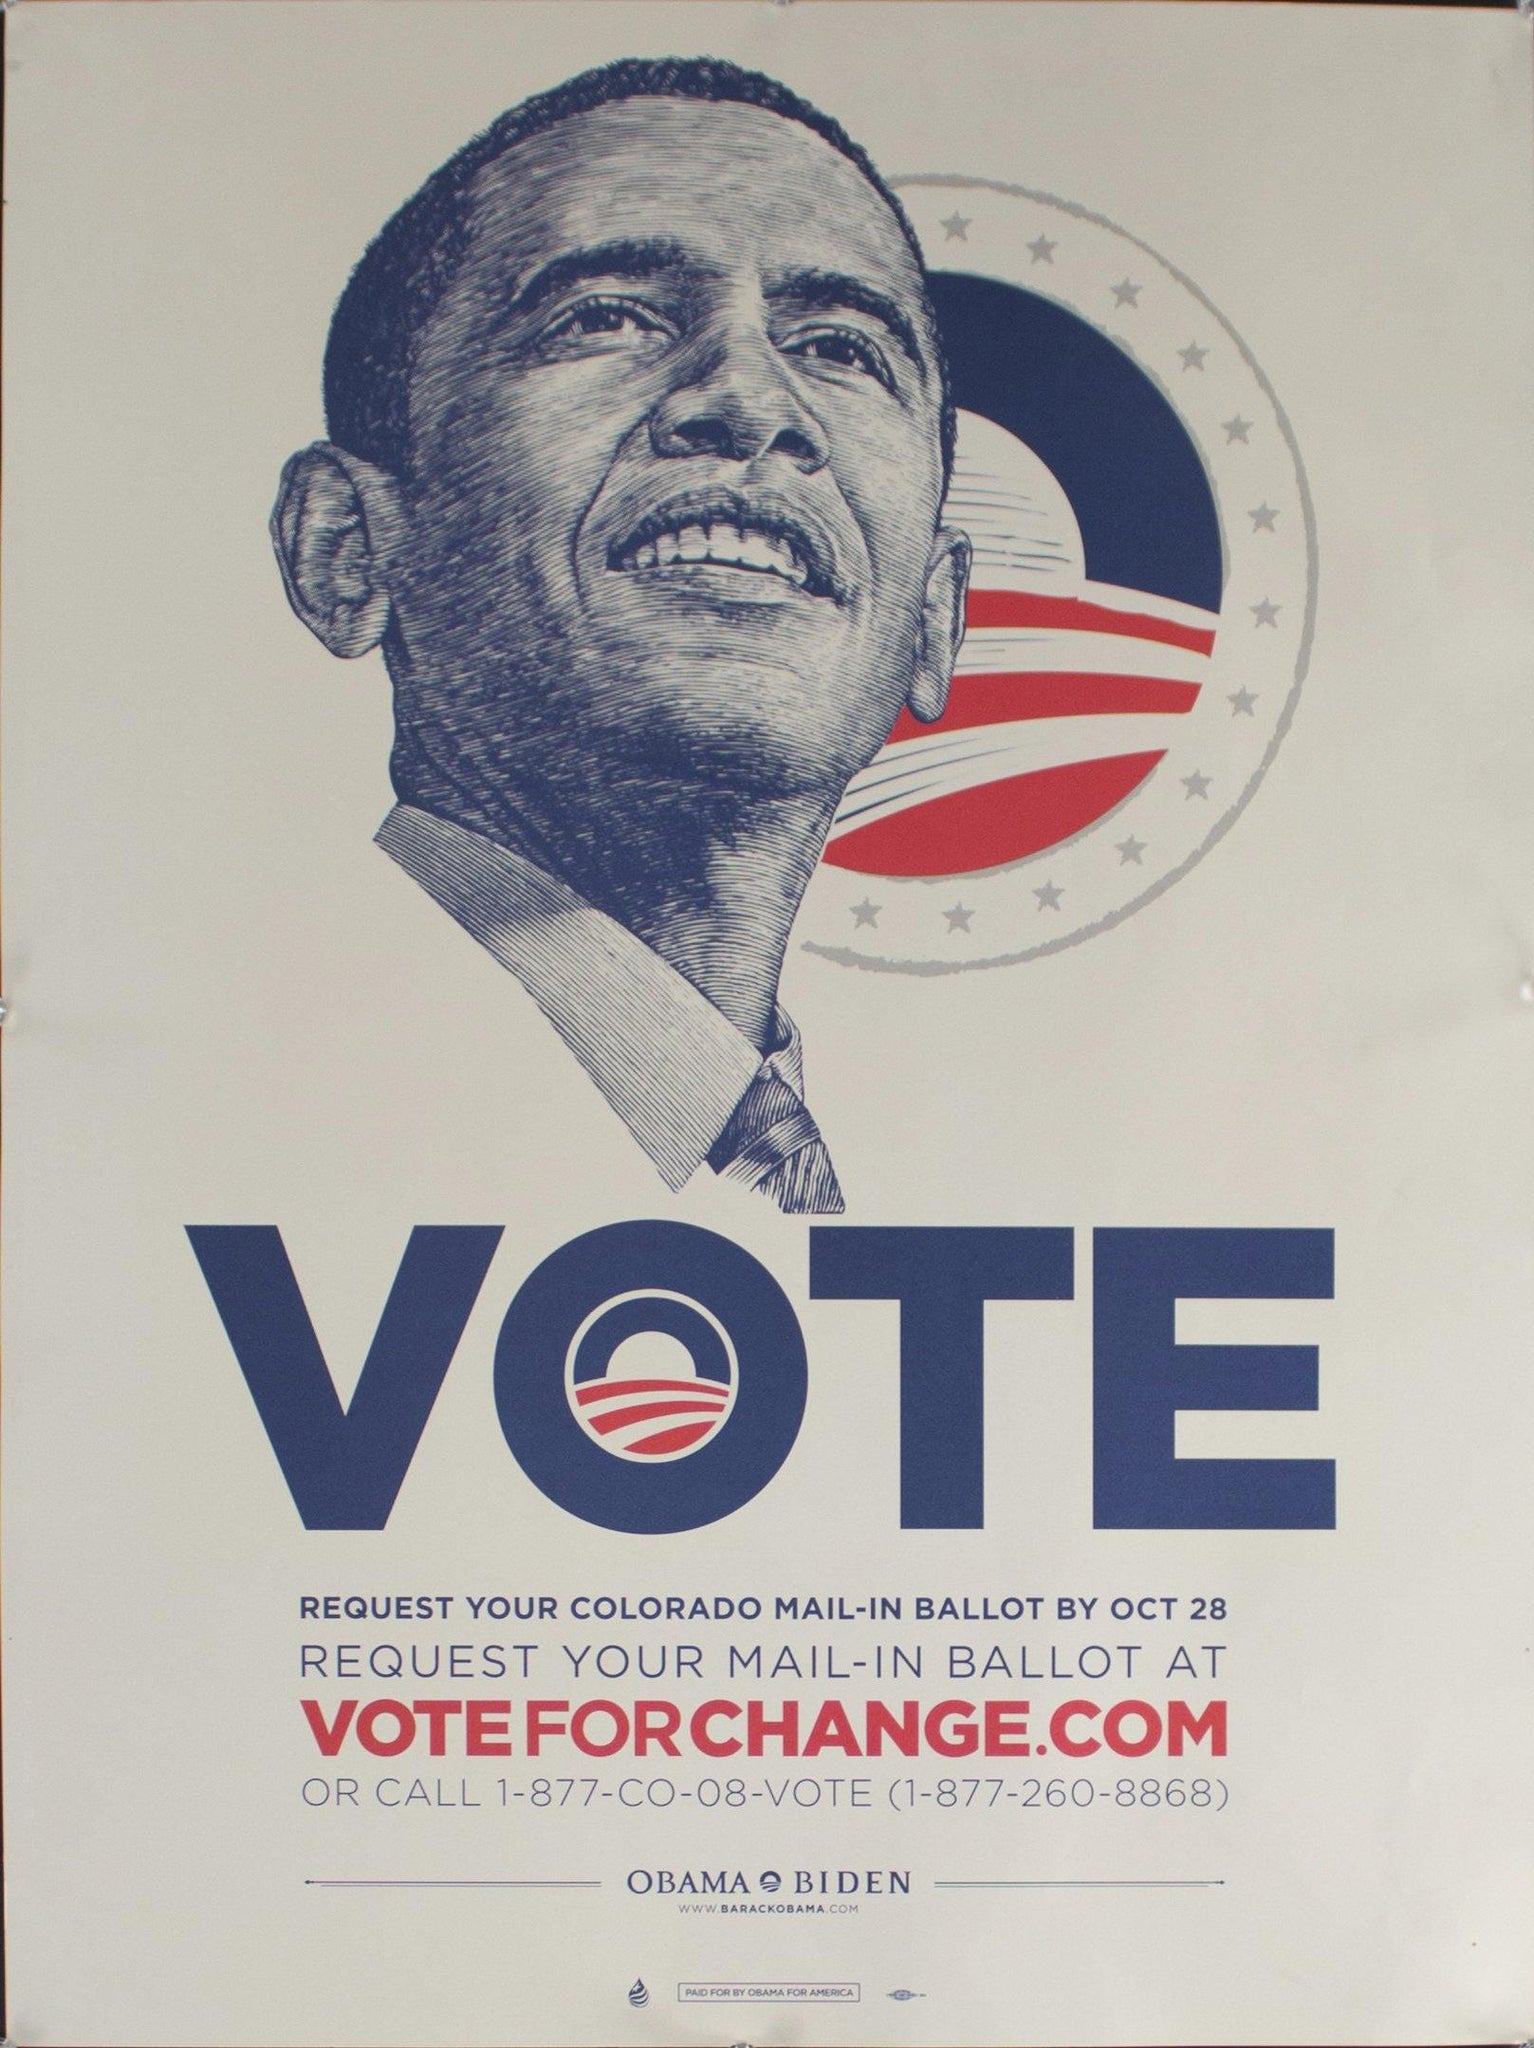 2008 Vote Obama-Biden | Request Your Colorado Mail-in Ballot by Oct 28 | voteforchange.com - Golden Age Posters